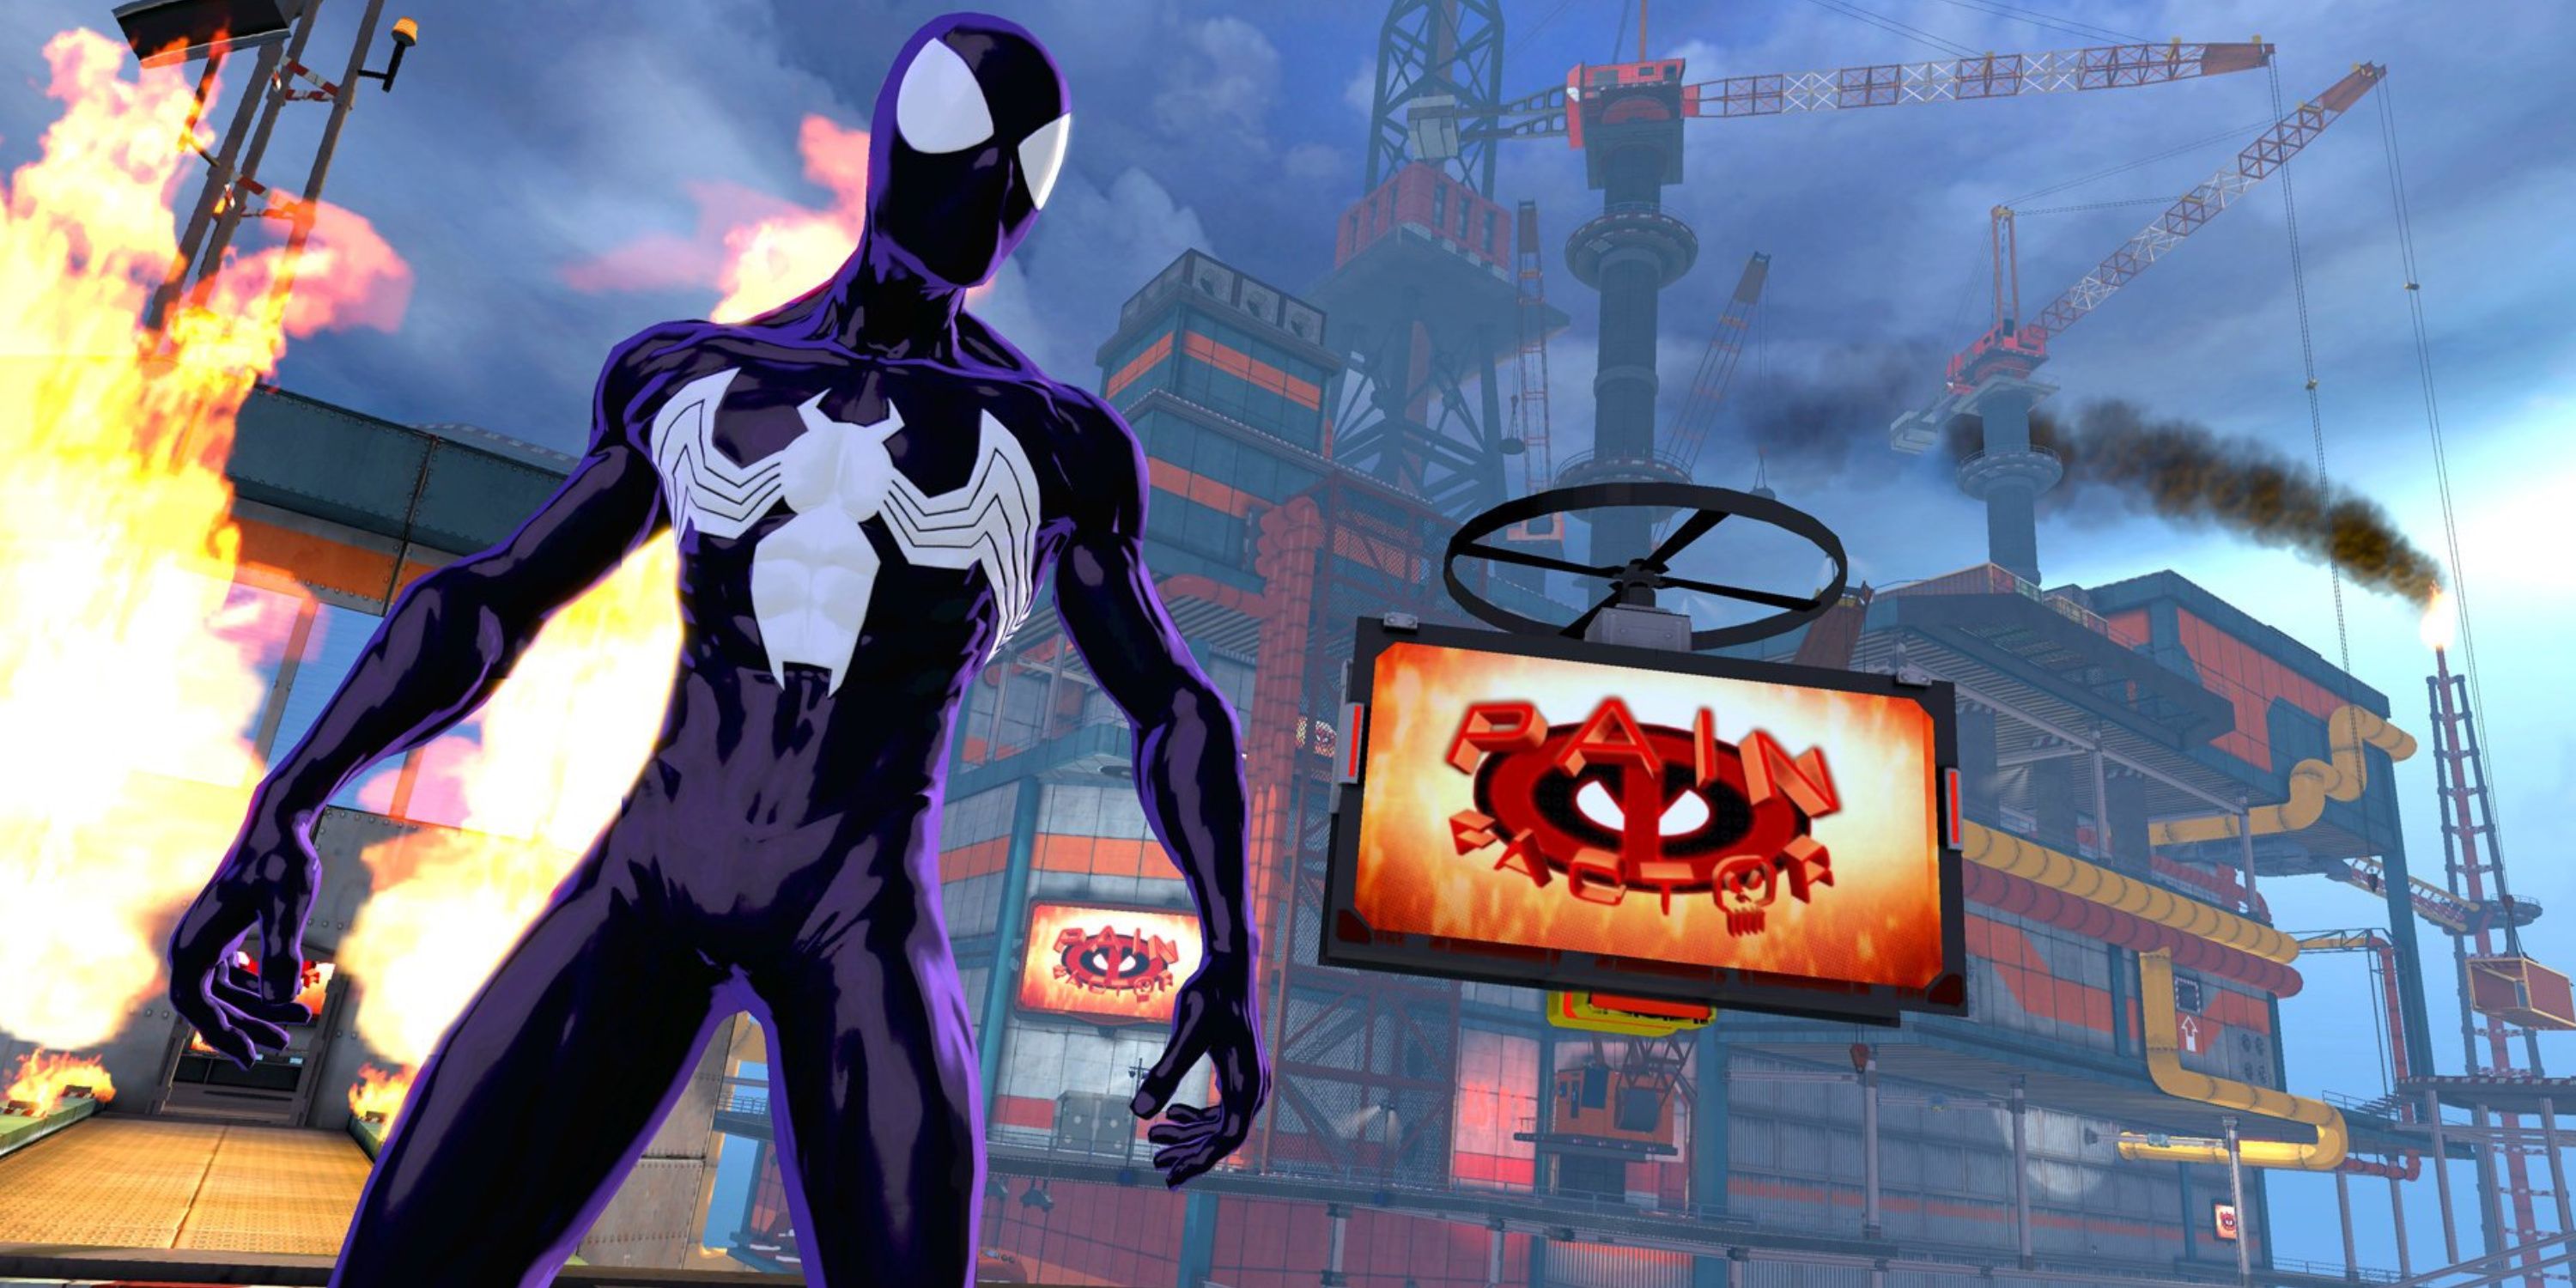 Ultimate Spider-Man section of the game with Black suit